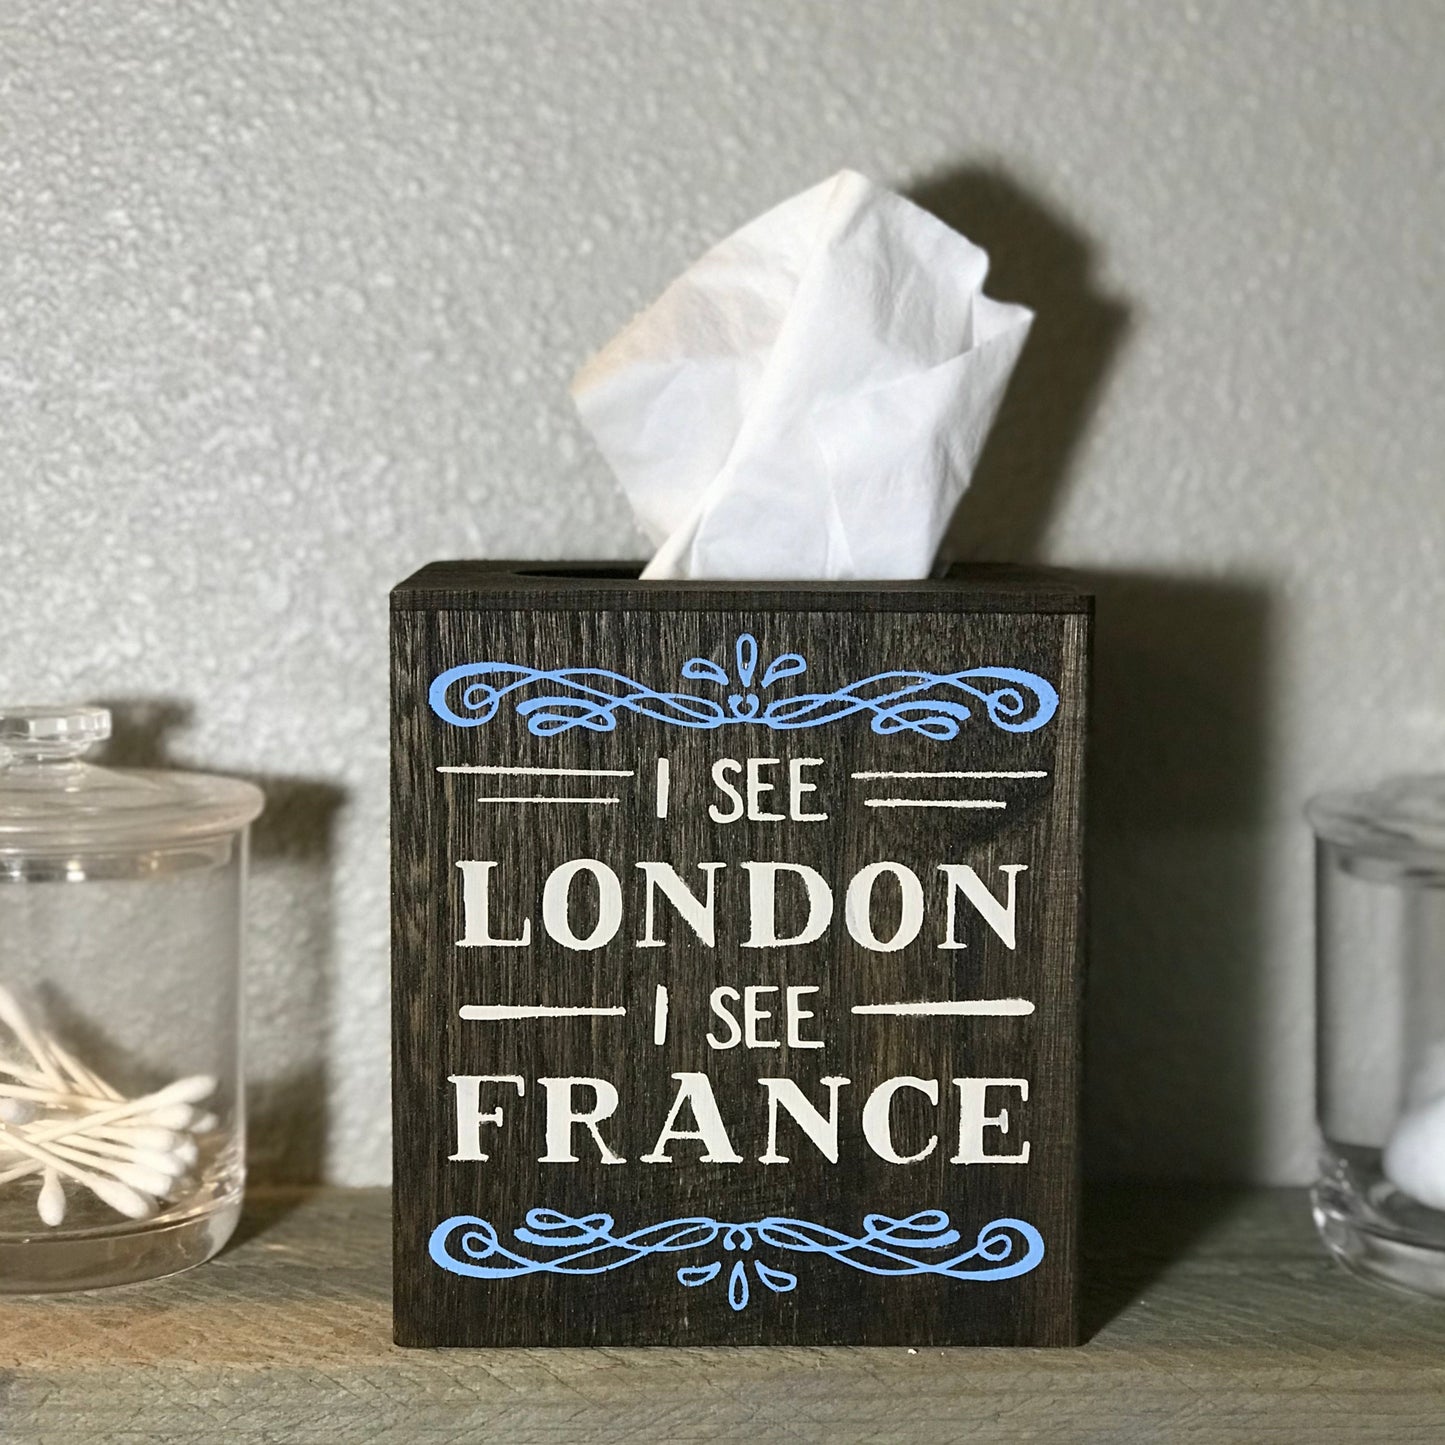 Crafted from wood. Measures 5.75 inch x 5.25 inch and will fit any standard size facial tissue box (not included). The box is stained in brown.  Saying "I See London I See France" painted on in cream with blue accents. The saying is on one side only.